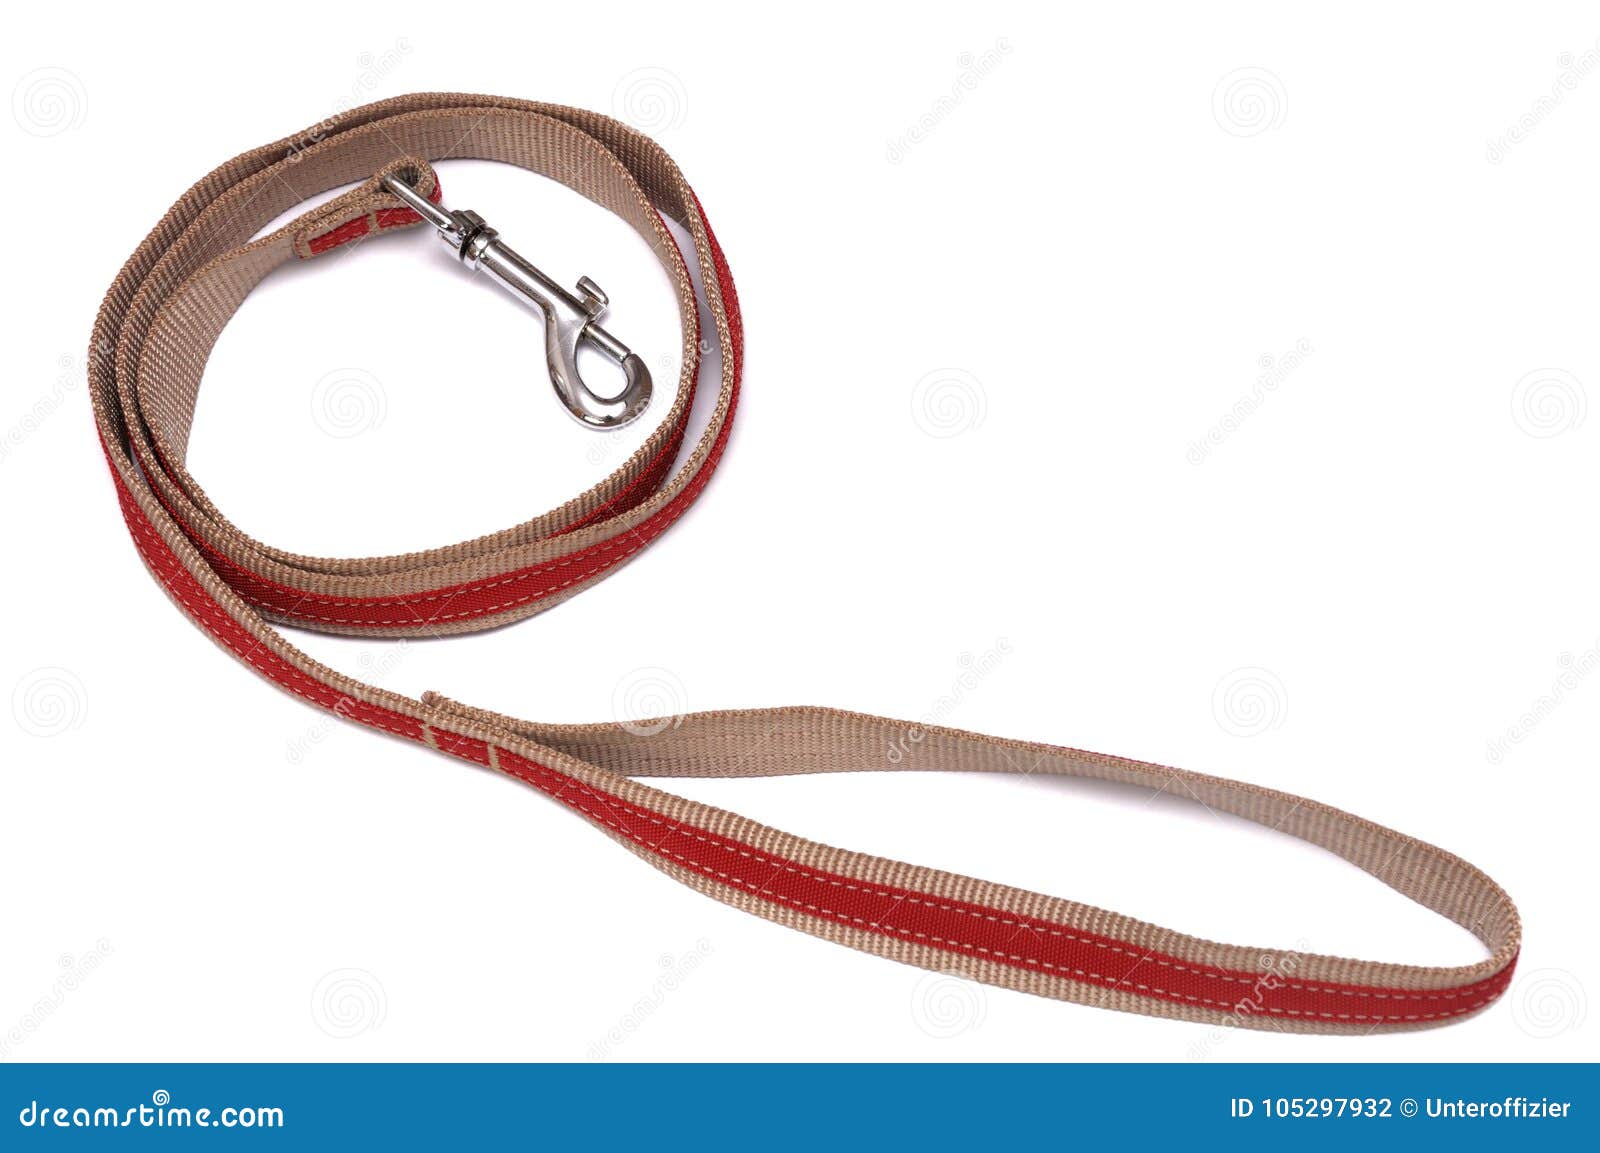 dog leash with quick release clasp bucket